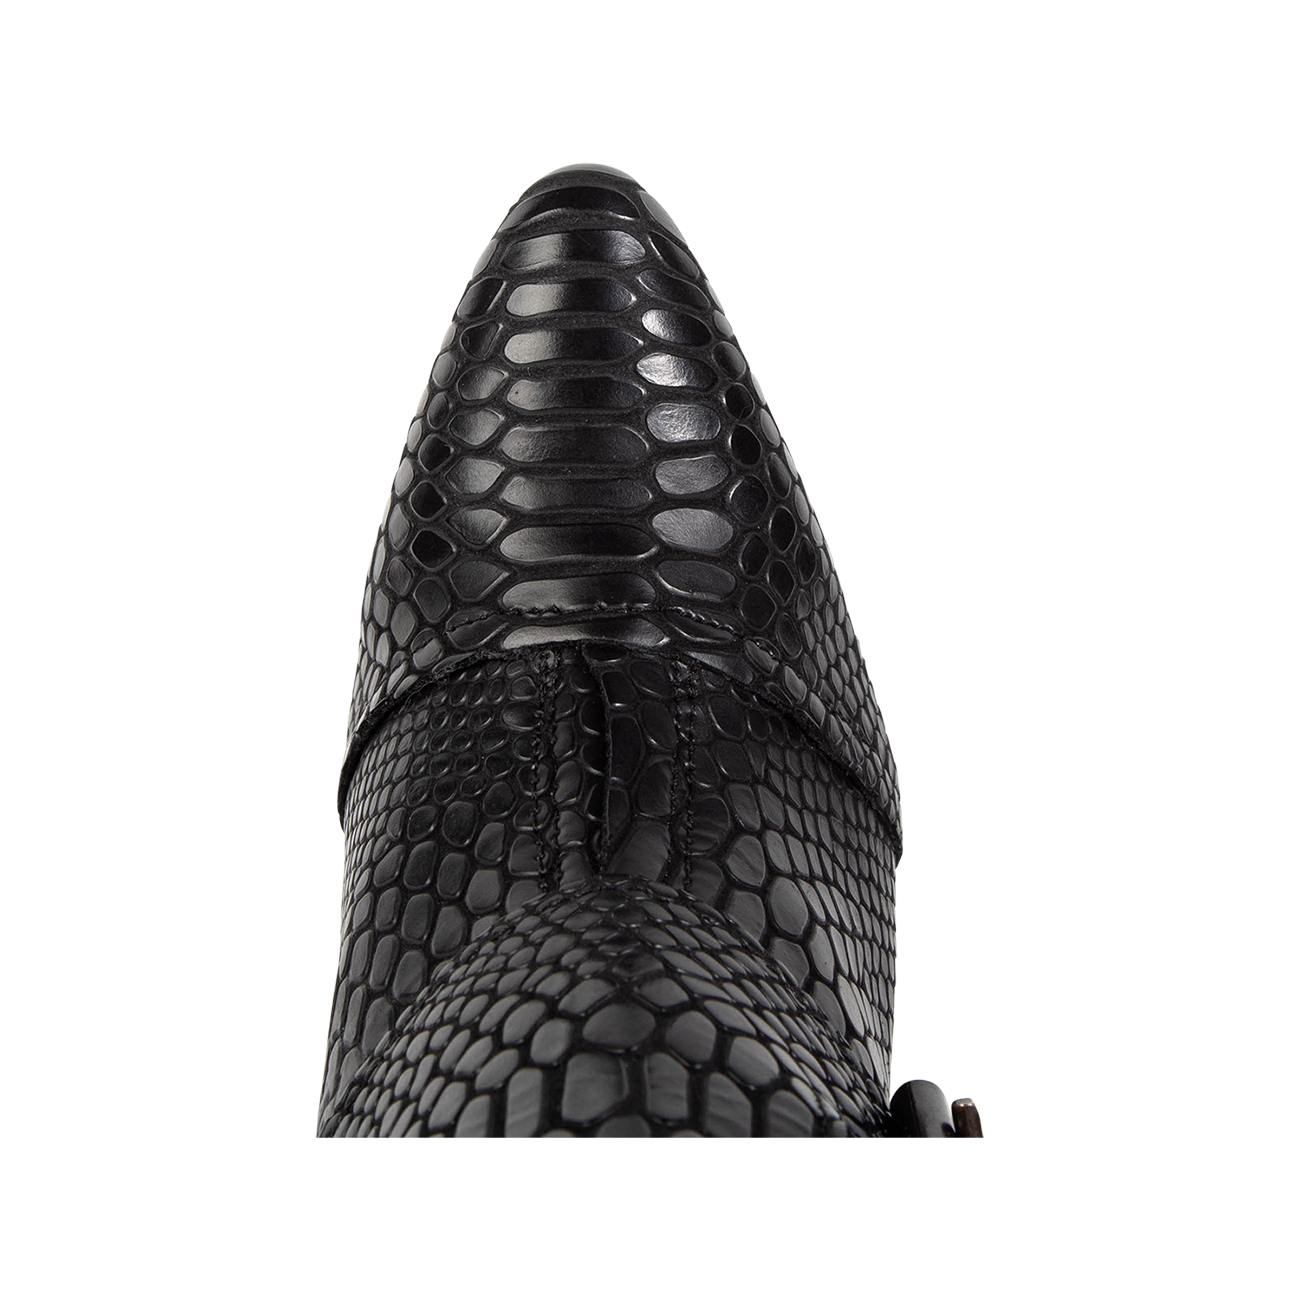 Top view showing pointed toe and front overlay on FREEBIRD women's Joey black snake leather bootie